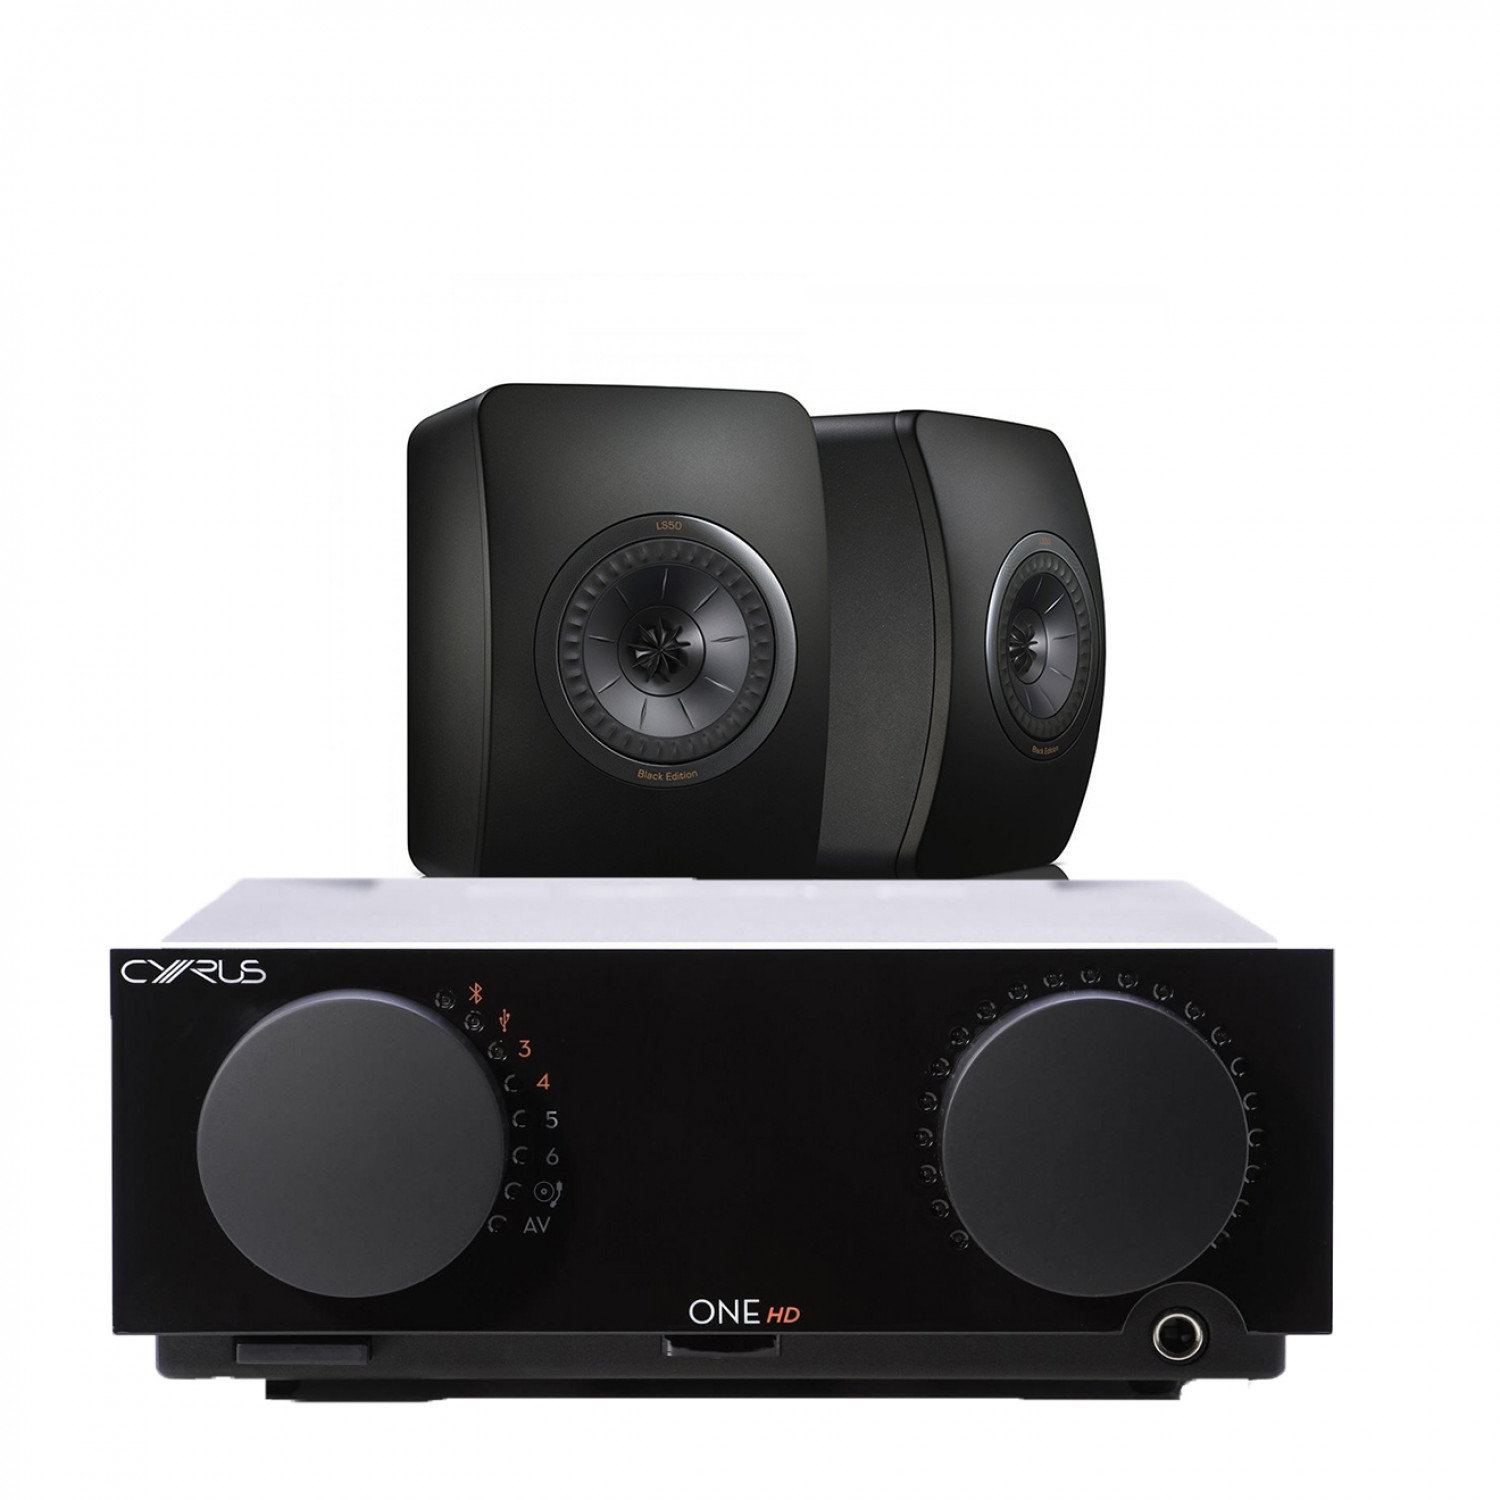 Cyrus One Hd Integrated Amplifier With Kef Ls50 Bookshelf Speakers